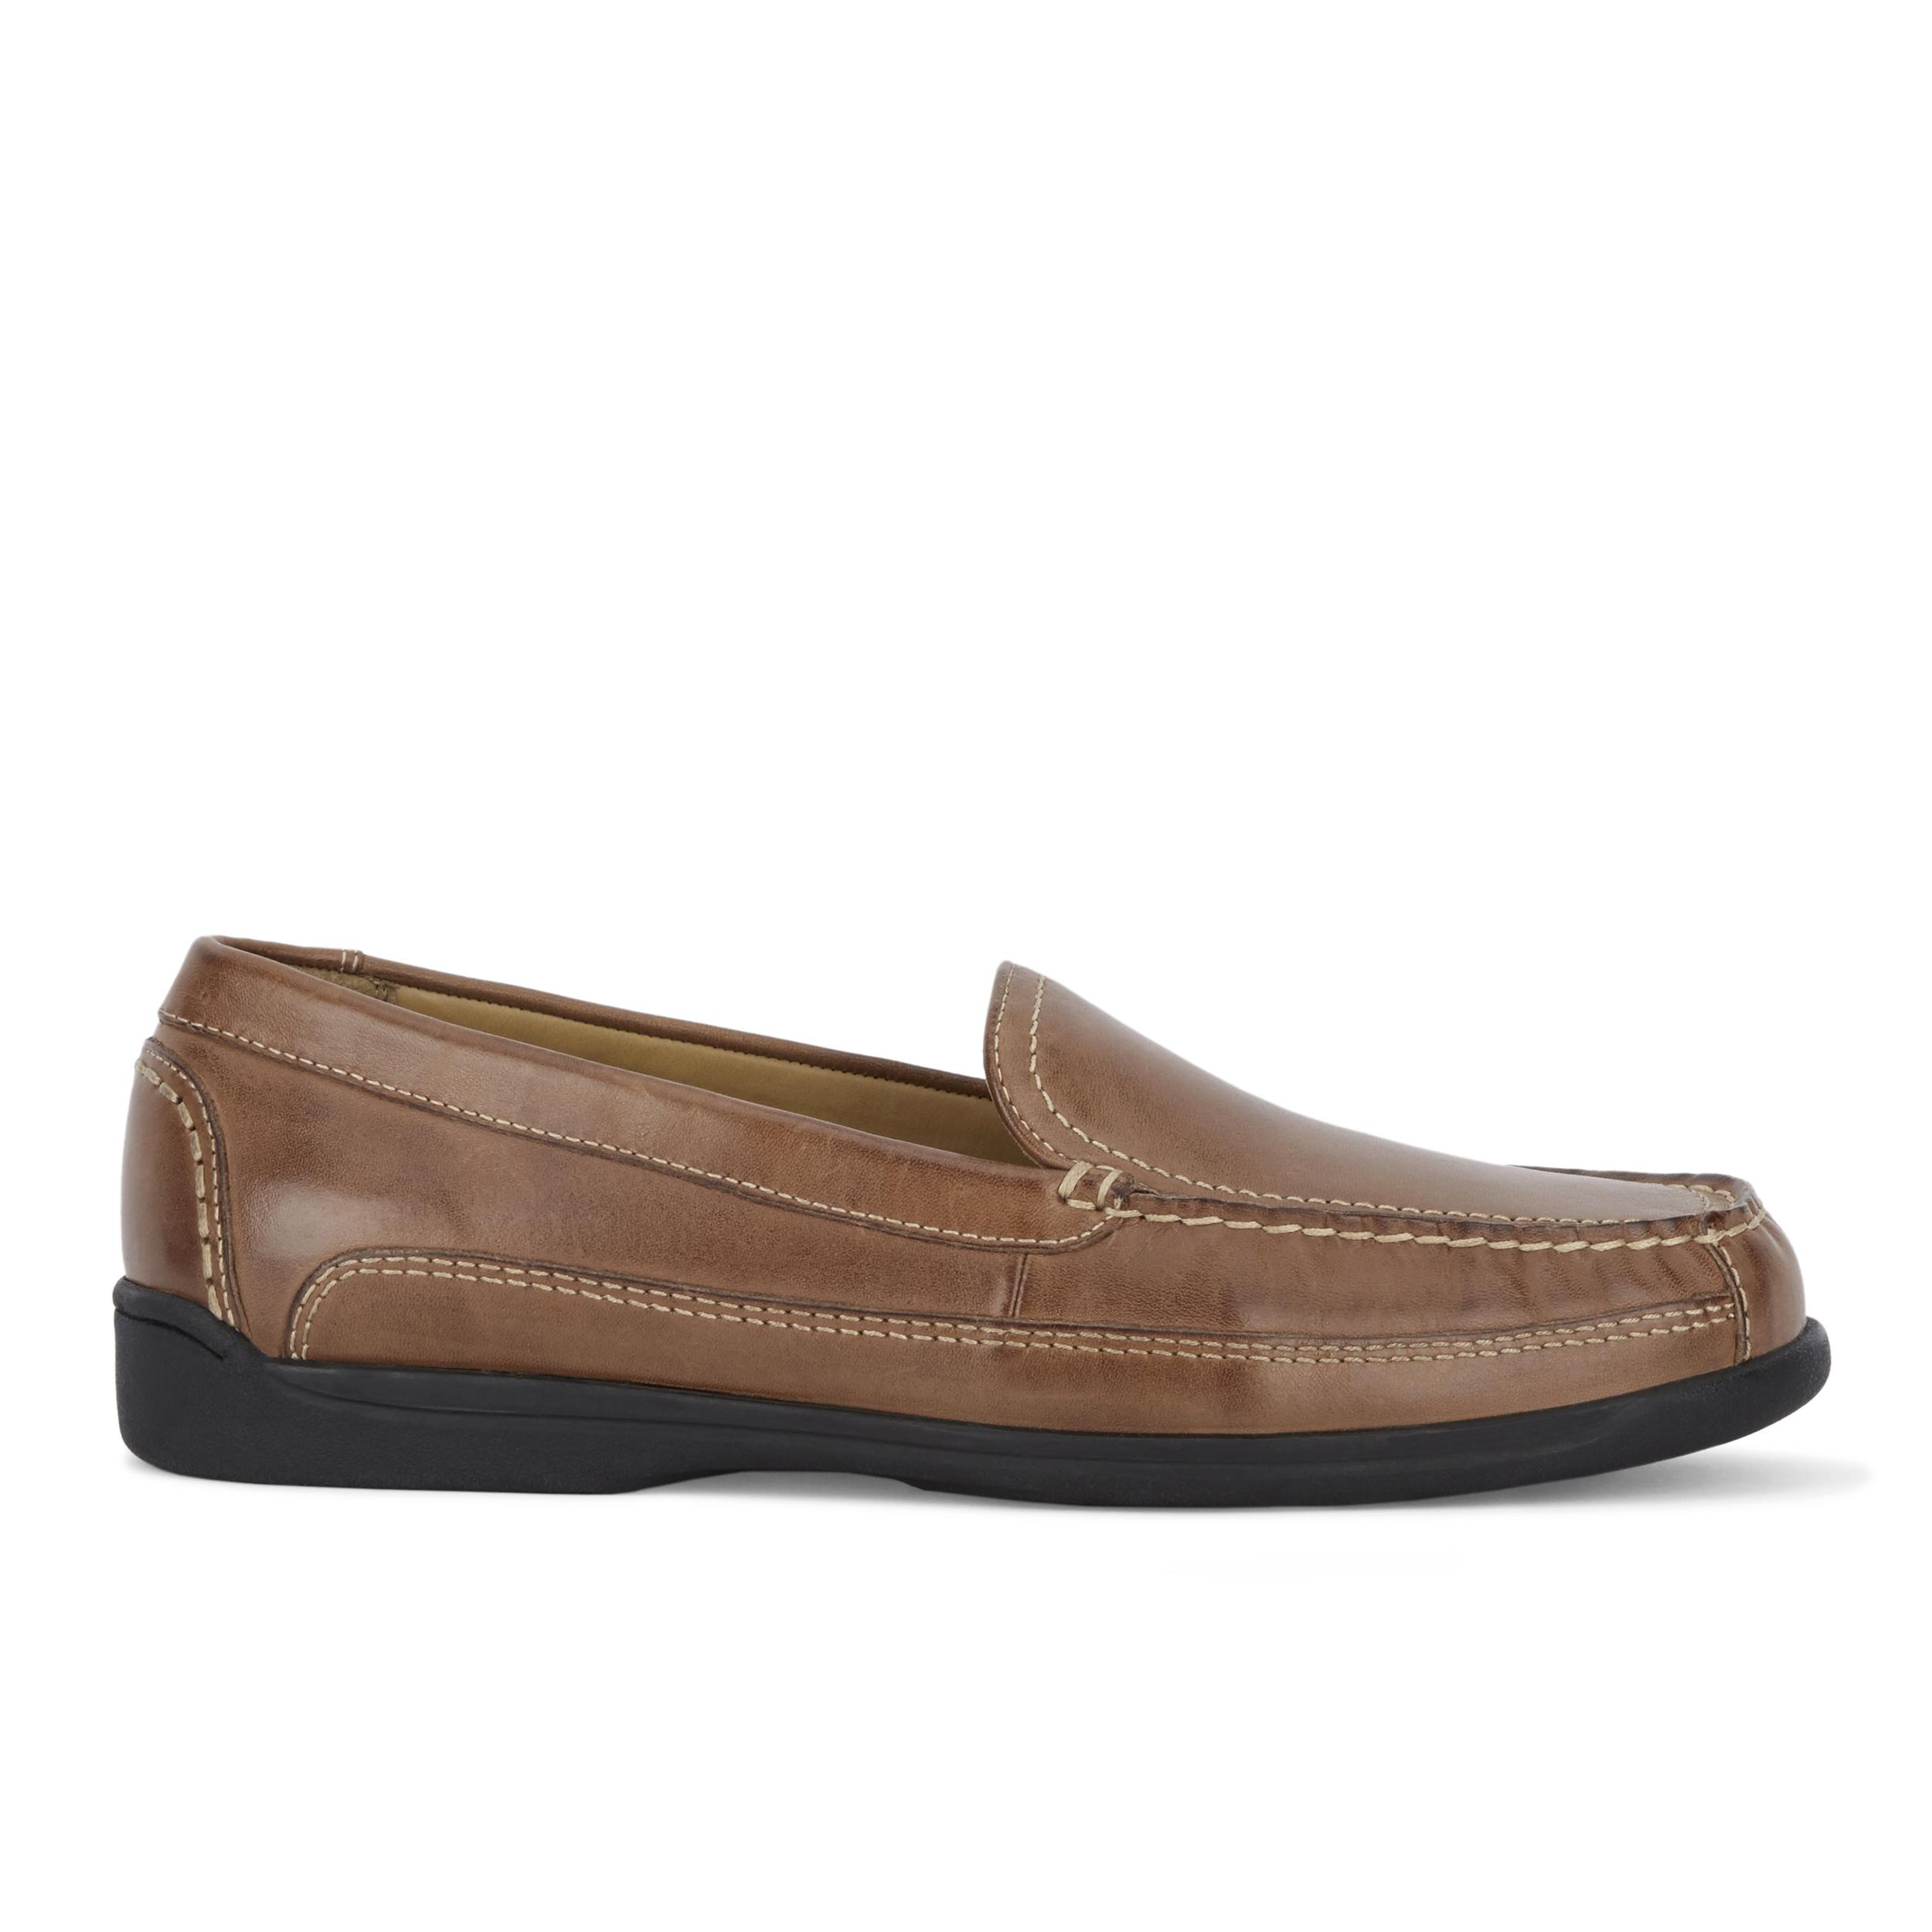 Dockers Leather Catalina Casual Loafer in Brown for Men - Lyst